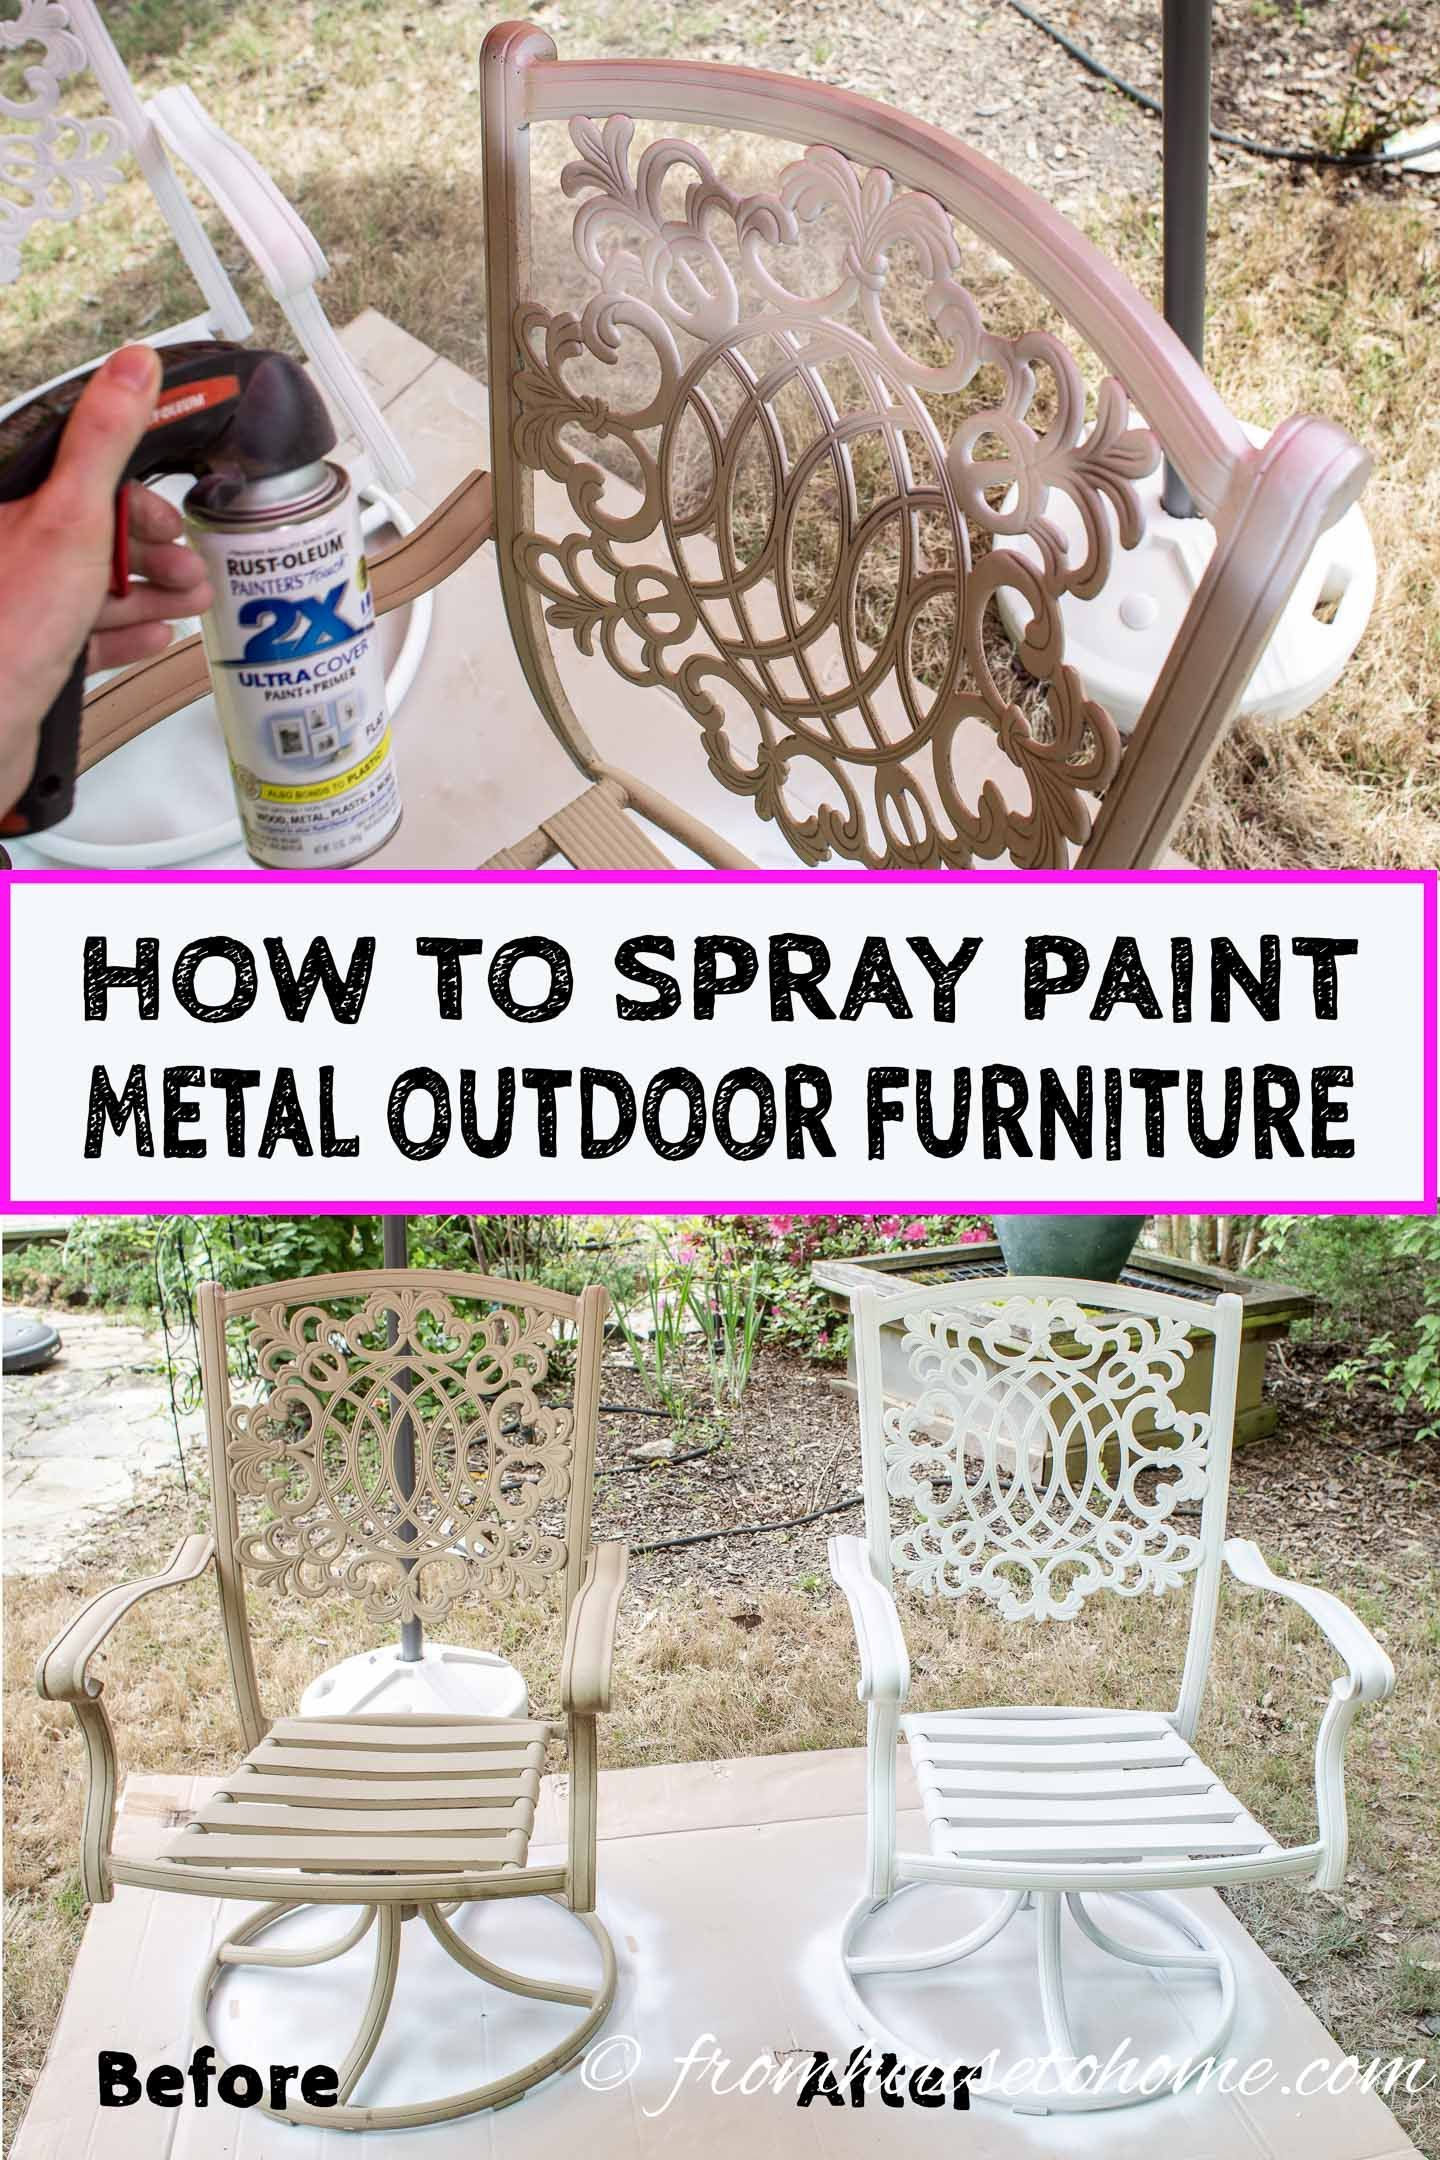 How To Paint Metal Patio Furniture (With Images) | Painting with How To Paint Metal Furniture